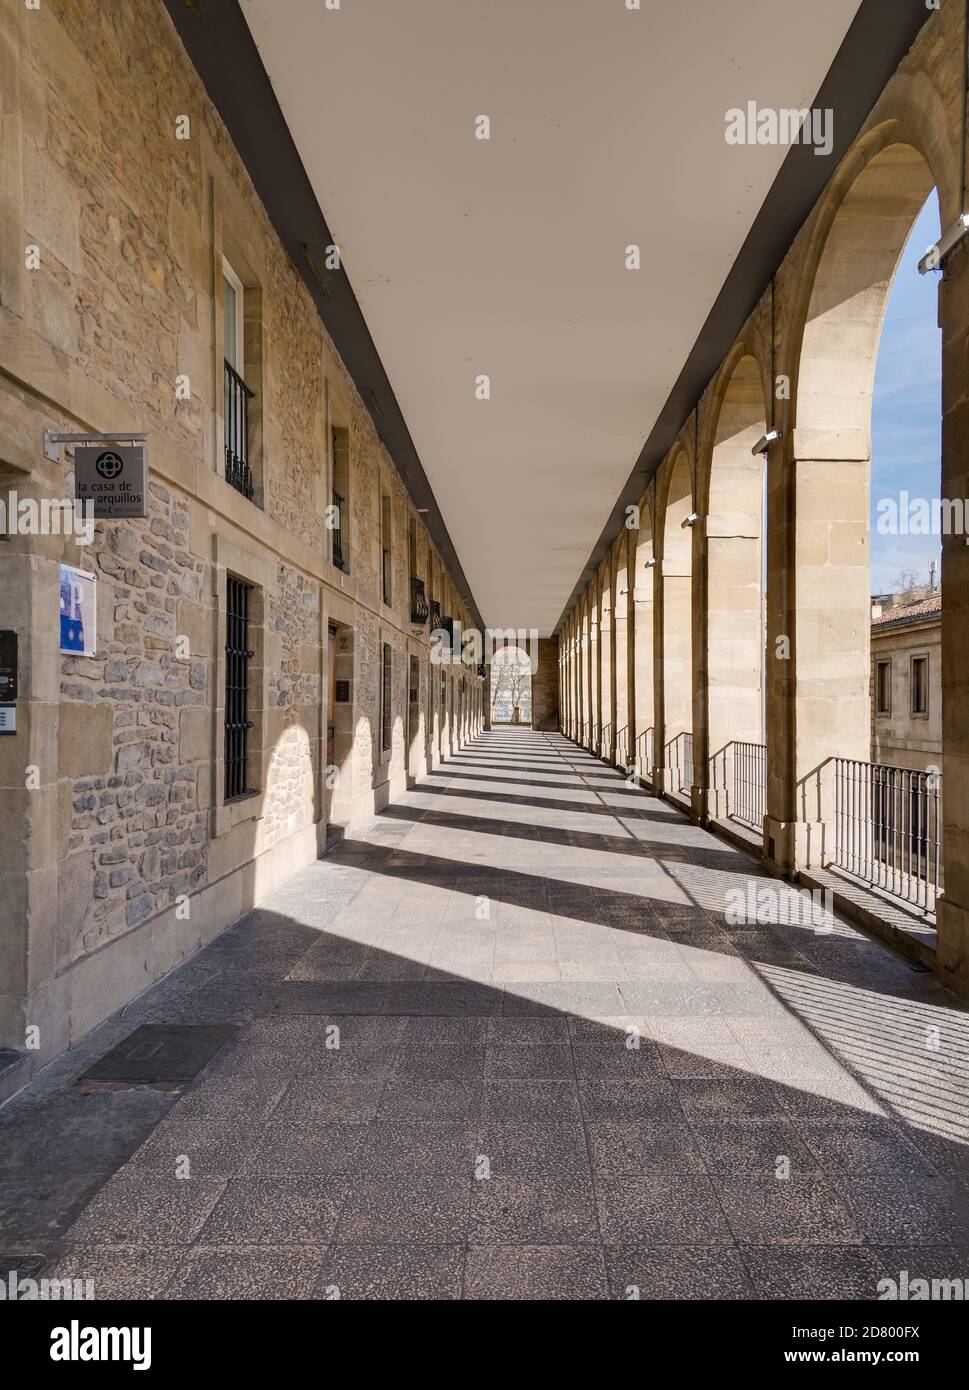 Los Arquillos passage ('the little arches') in the Old Town of Vitoria-Gasteiz, Basque Country, Spain Stock Photo